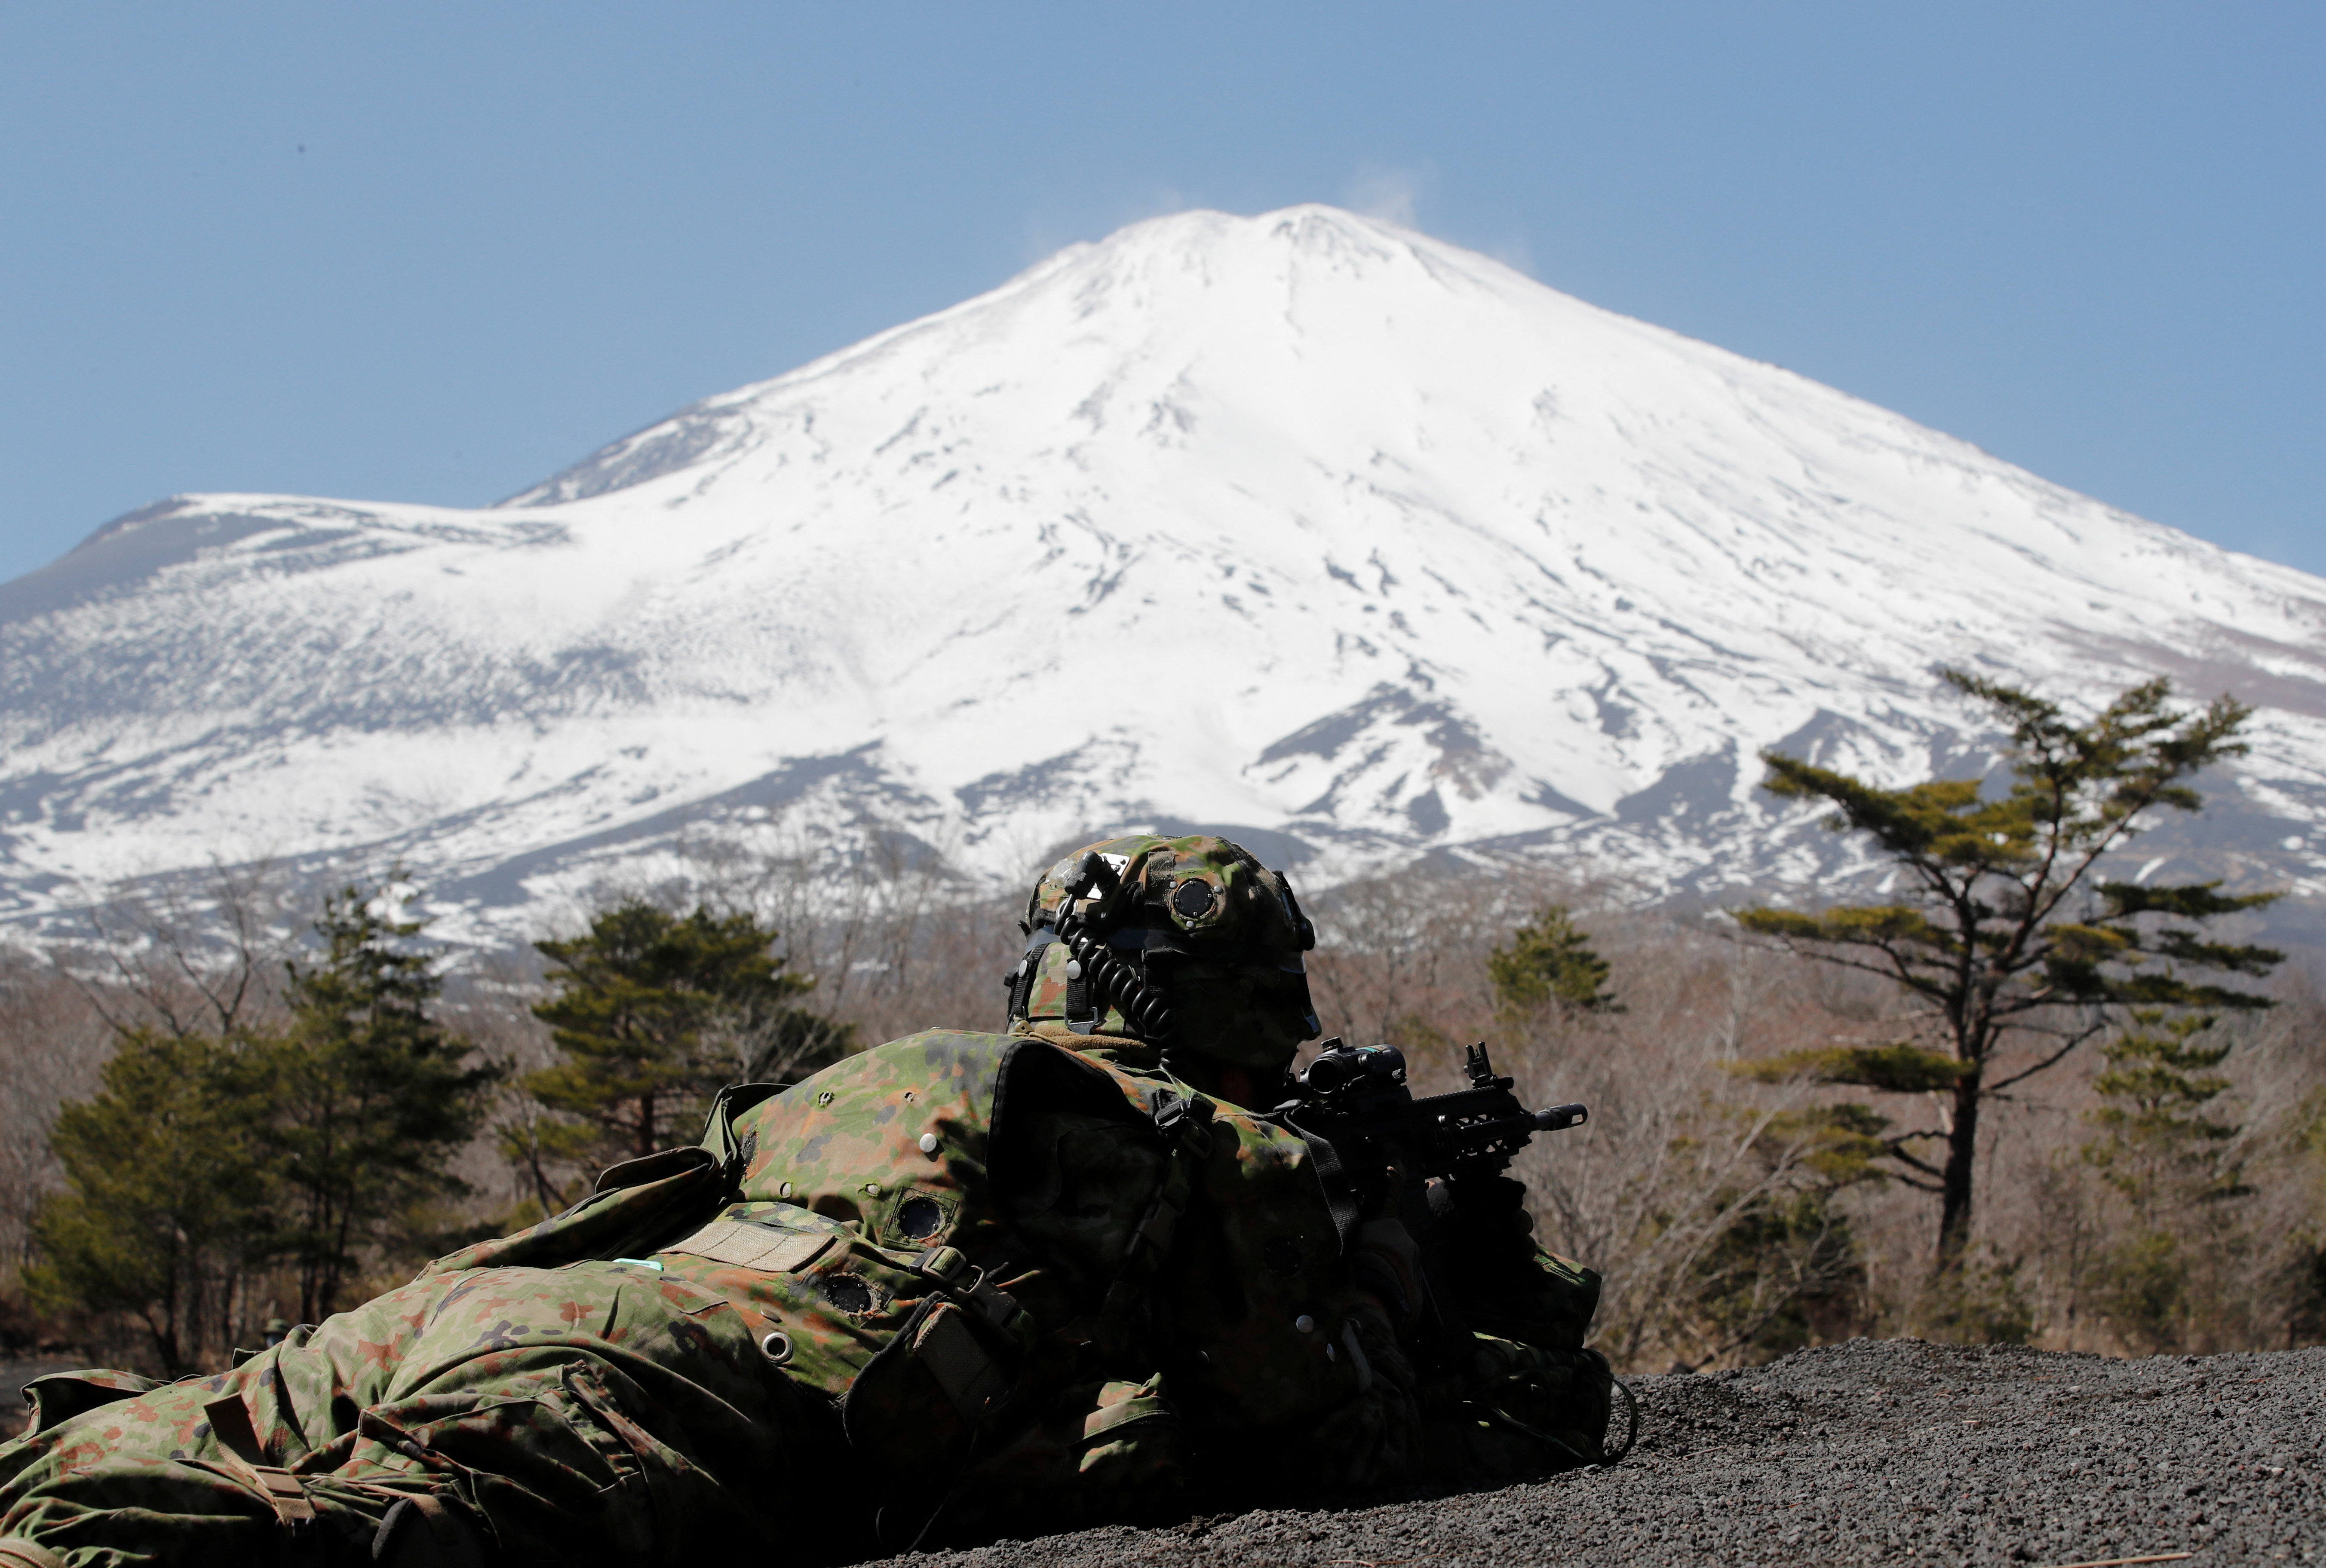 Mt.Fuji is seen while a member of the Japanese Self-Defense Force’s Amphibious Rapid Deployment Brigade takes a position during joint airborne landing exercises with U.S. marines in Gotemba